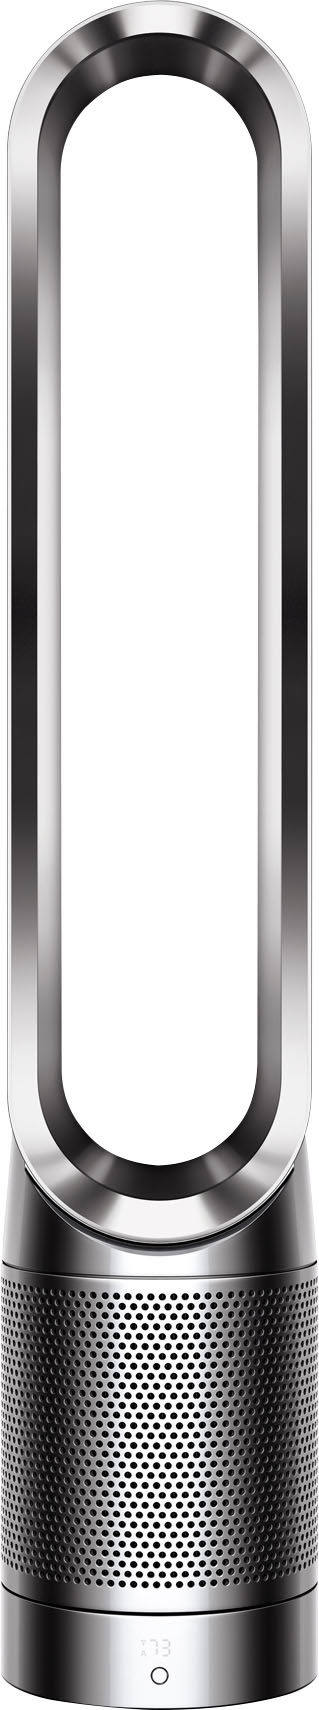 Dyson Pure Cool Link TP02 Tower Purifier and Fan Nickel 308401-01 - Best